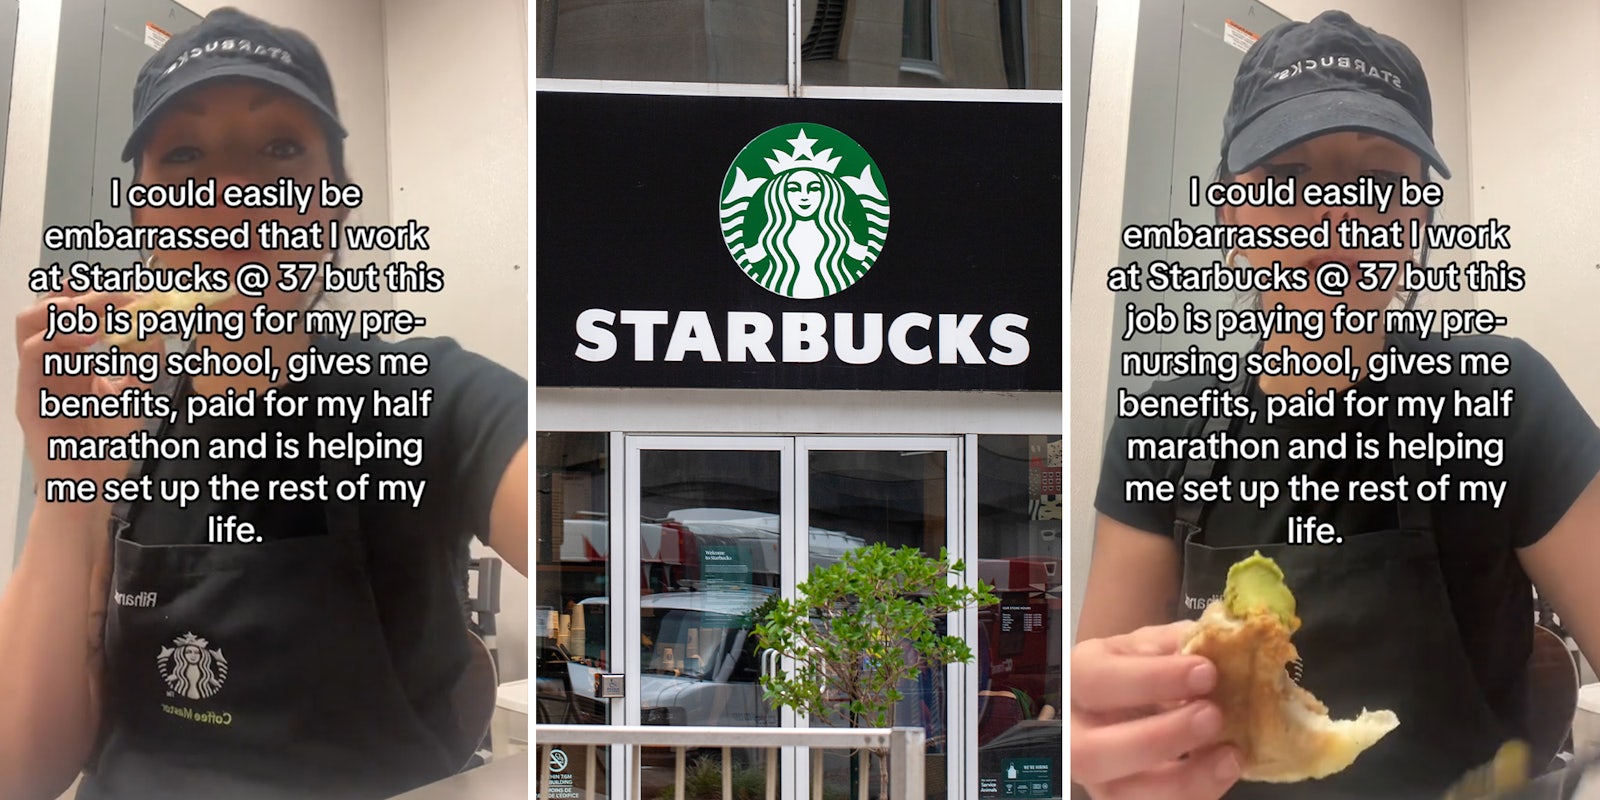 Viewers defend Starbucks barista for working there at 37 years old